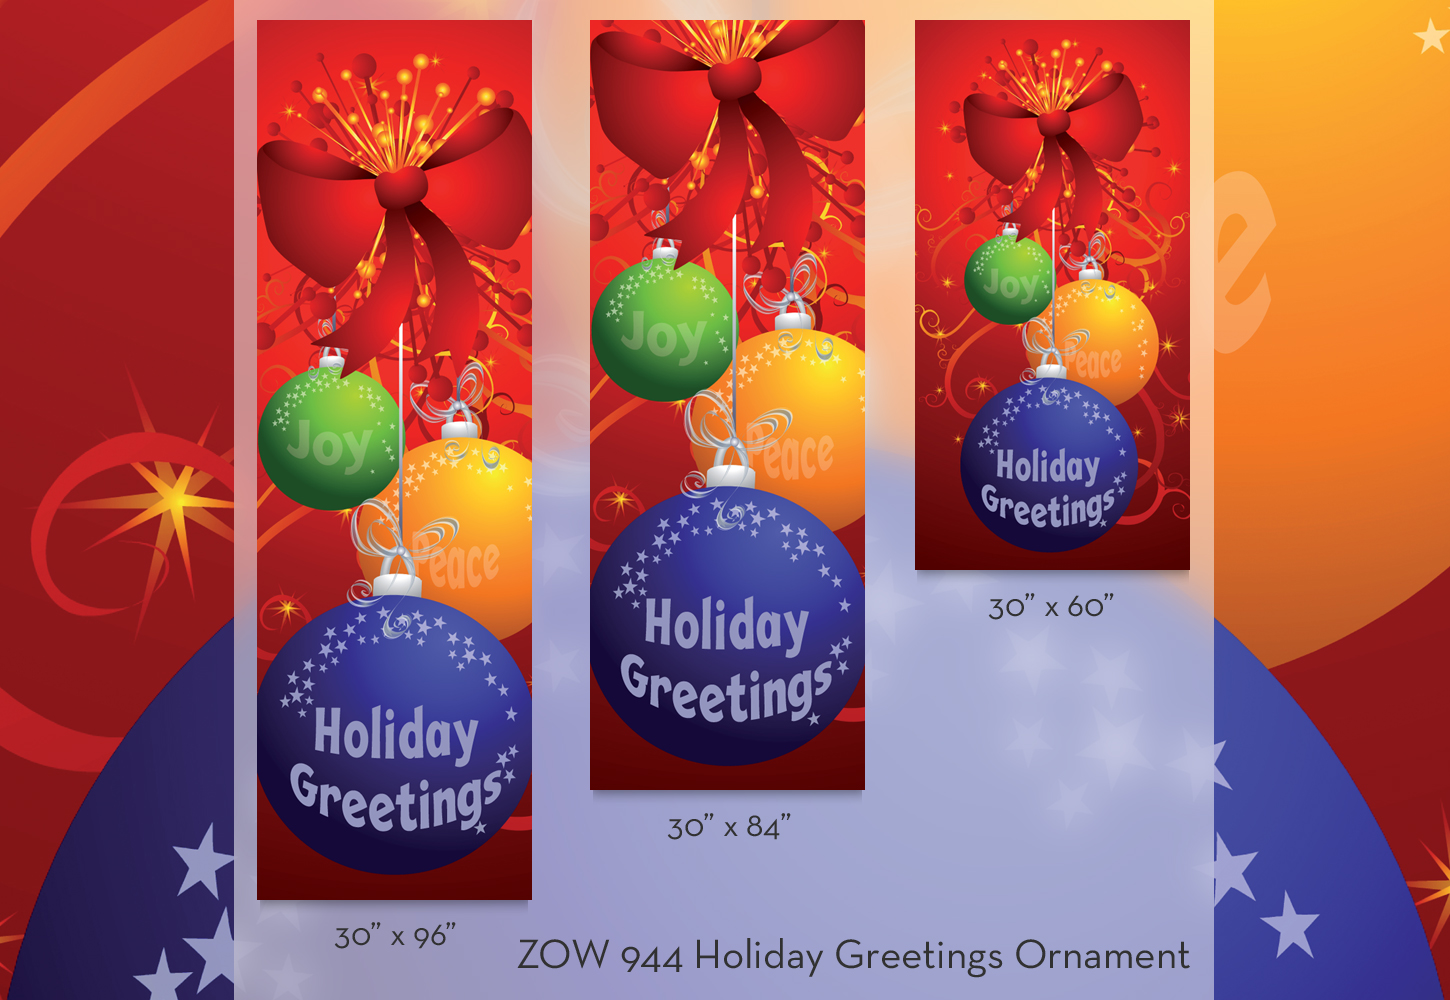 ZOW 944 Holiday Greetings Ornament